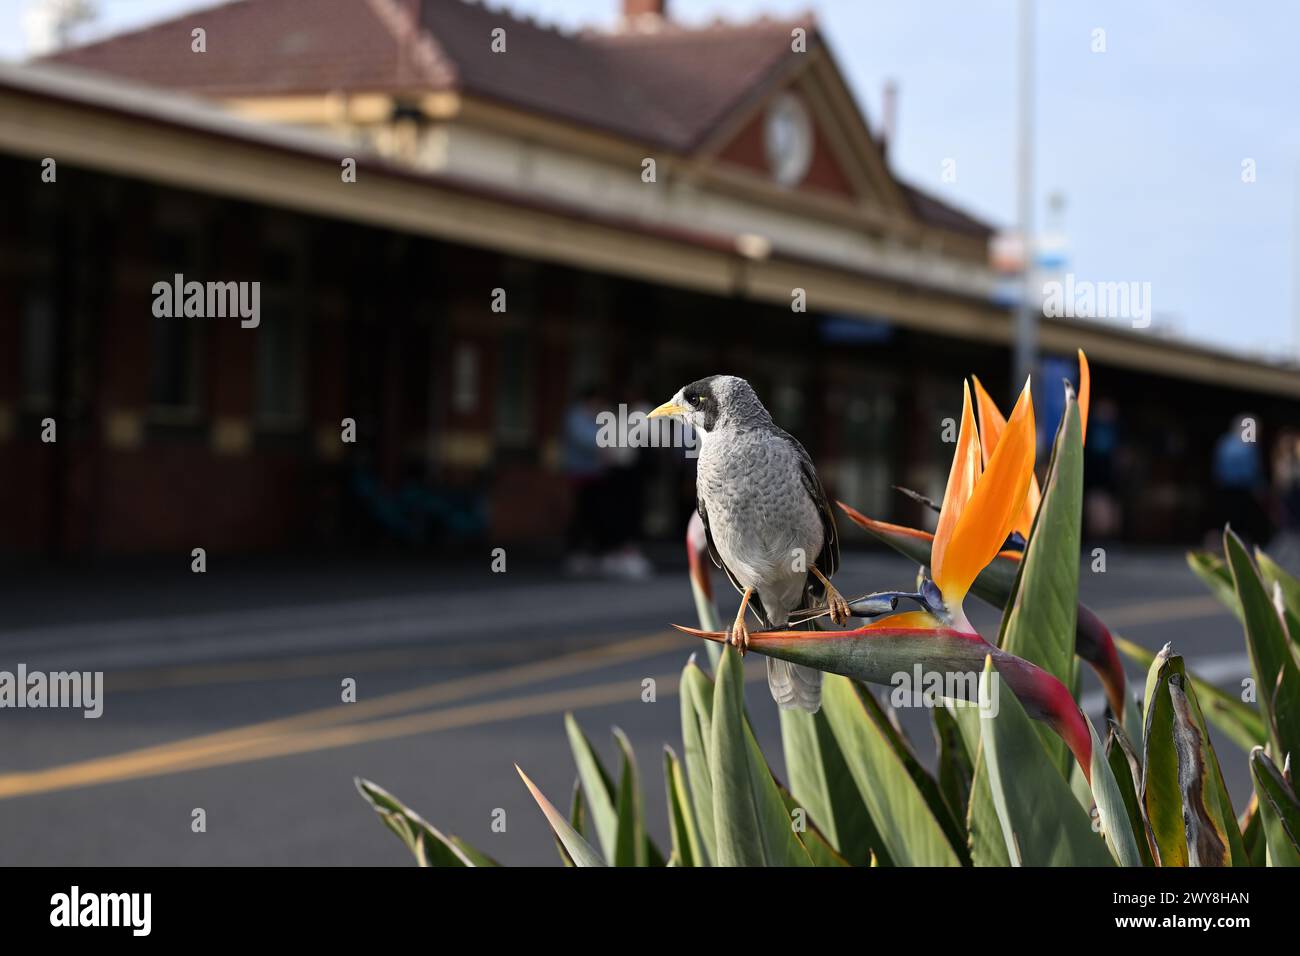 Noisy miner bird perched on a bird of paradise flower, outside the entrance to a railway station Stock Photo